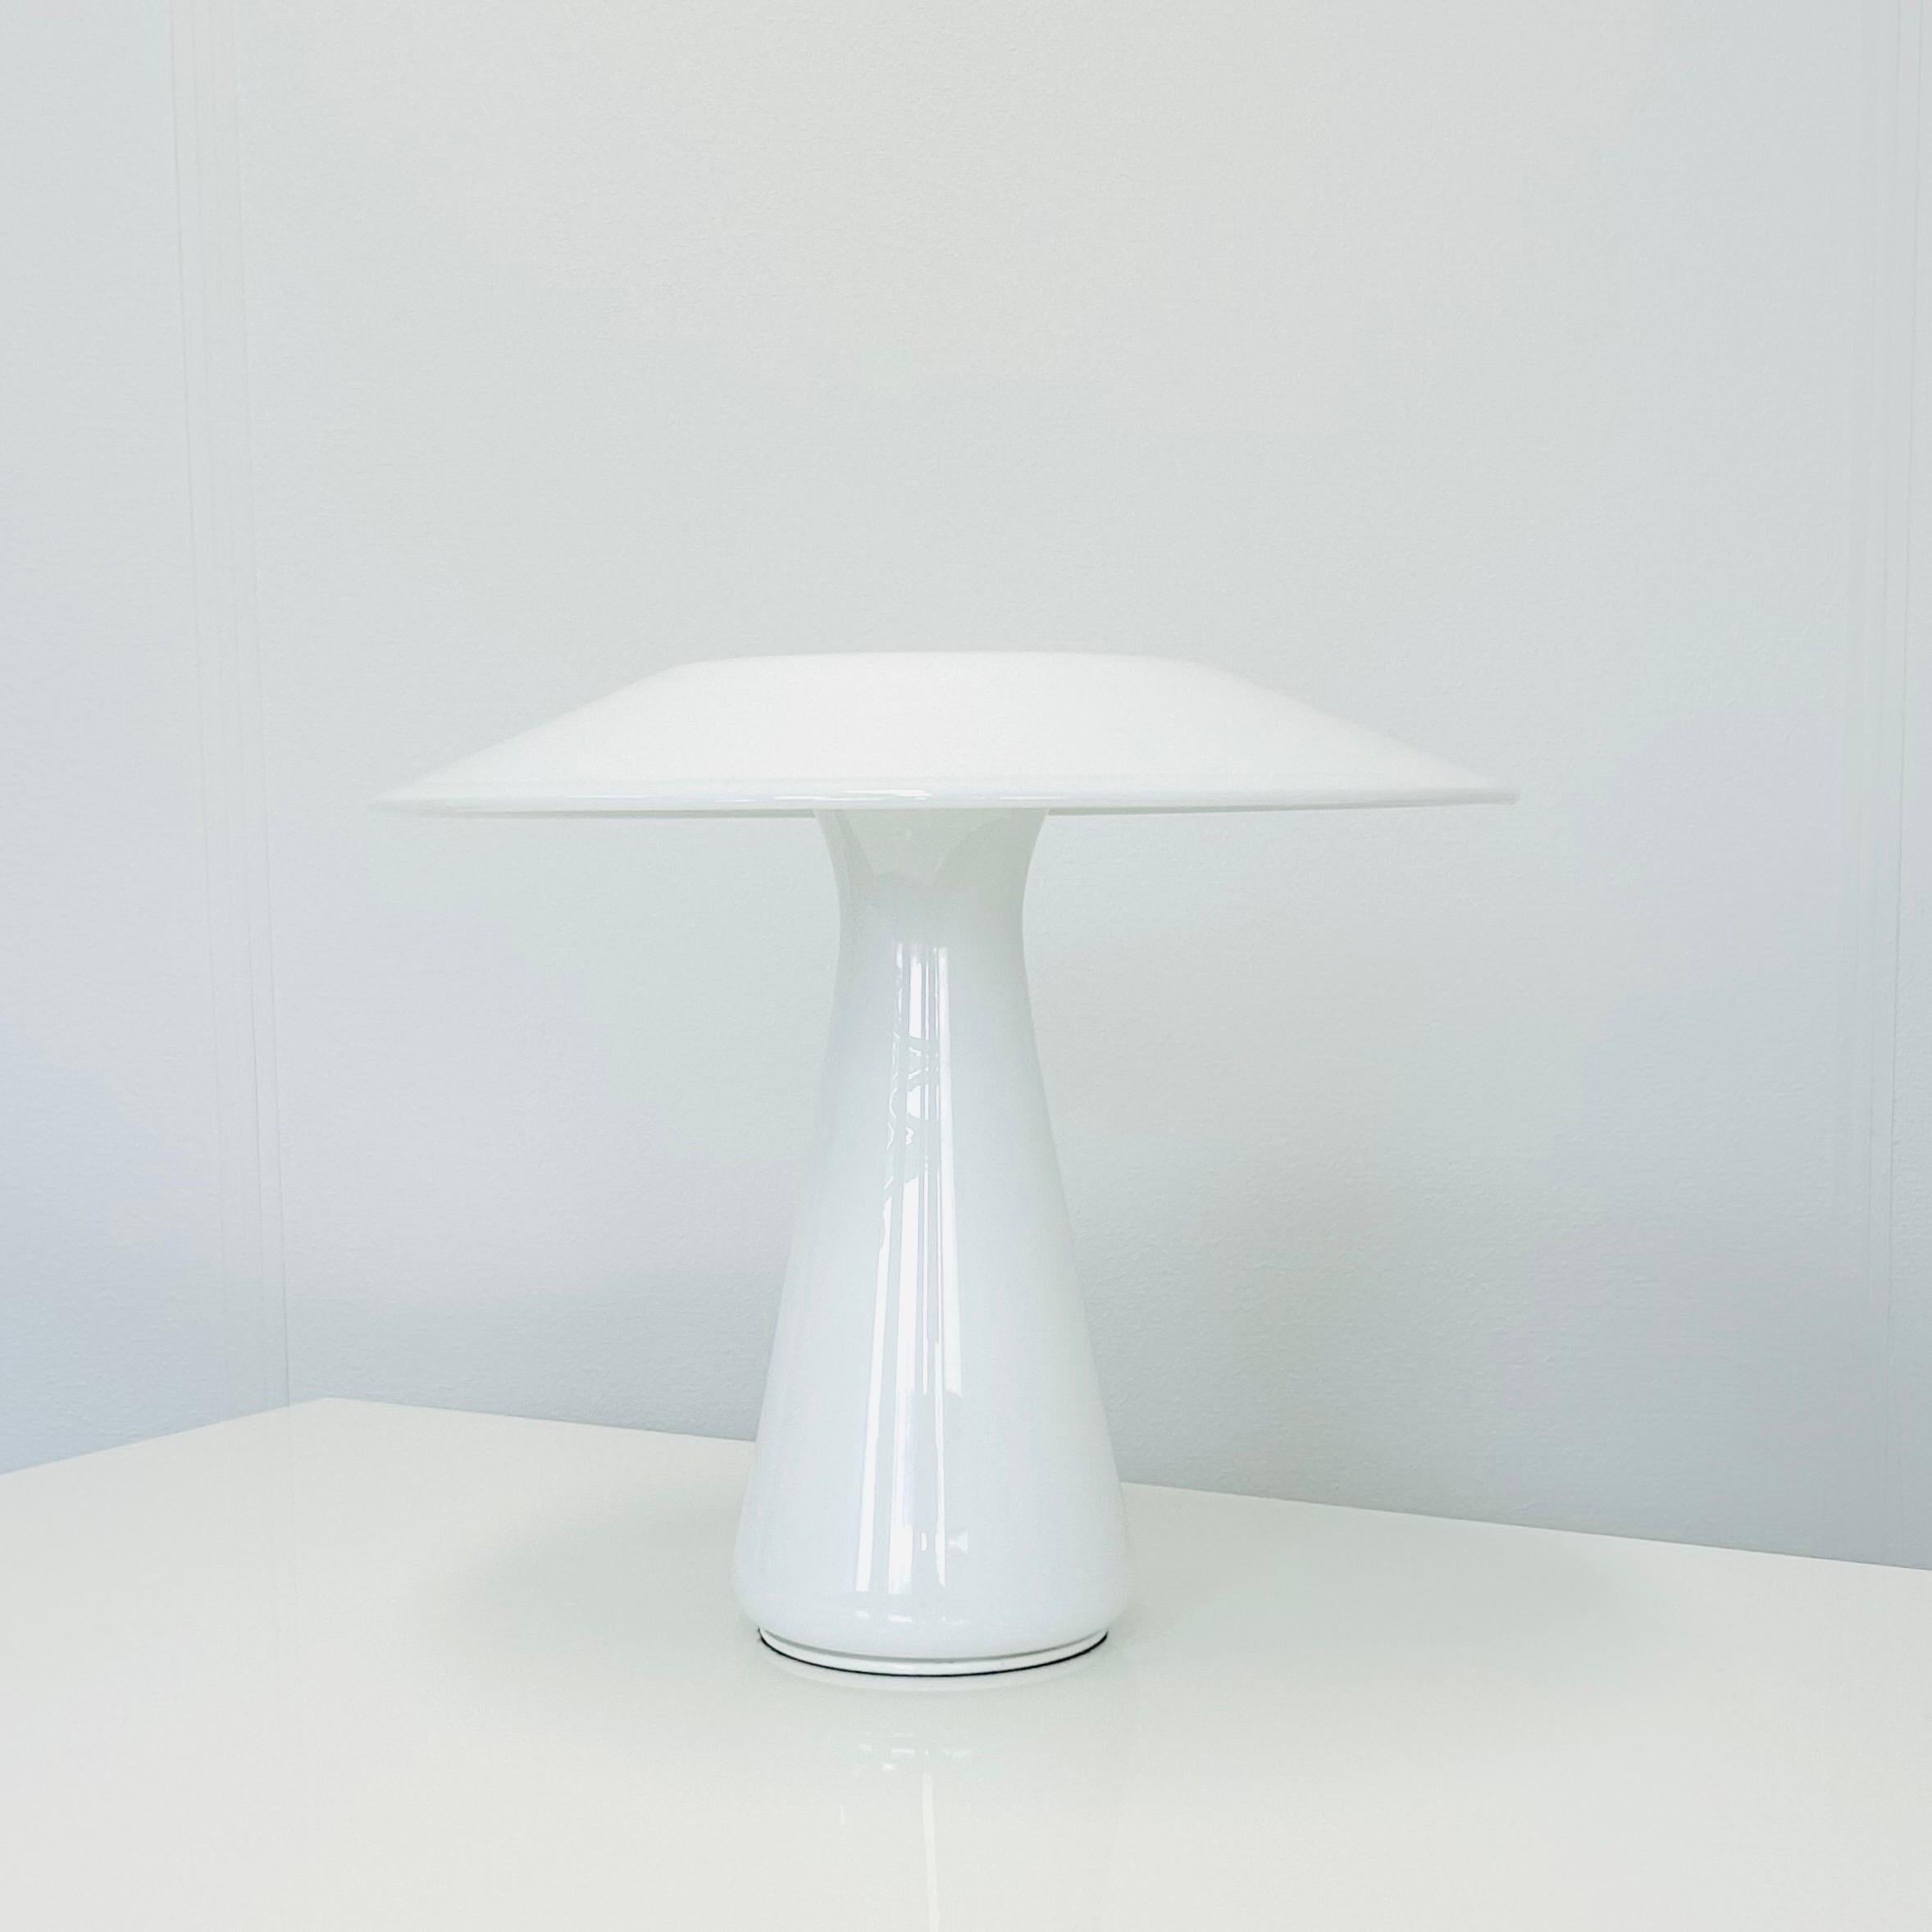 A mushroom shaped white glass desk lamp designed by female designer Sidse Werner for Danish Holmegaard Glasværk in 1985. It is called 'Phoenix' and is quit a rarity. It is in excellent vintage condition. The label is fully intact and the lamp has